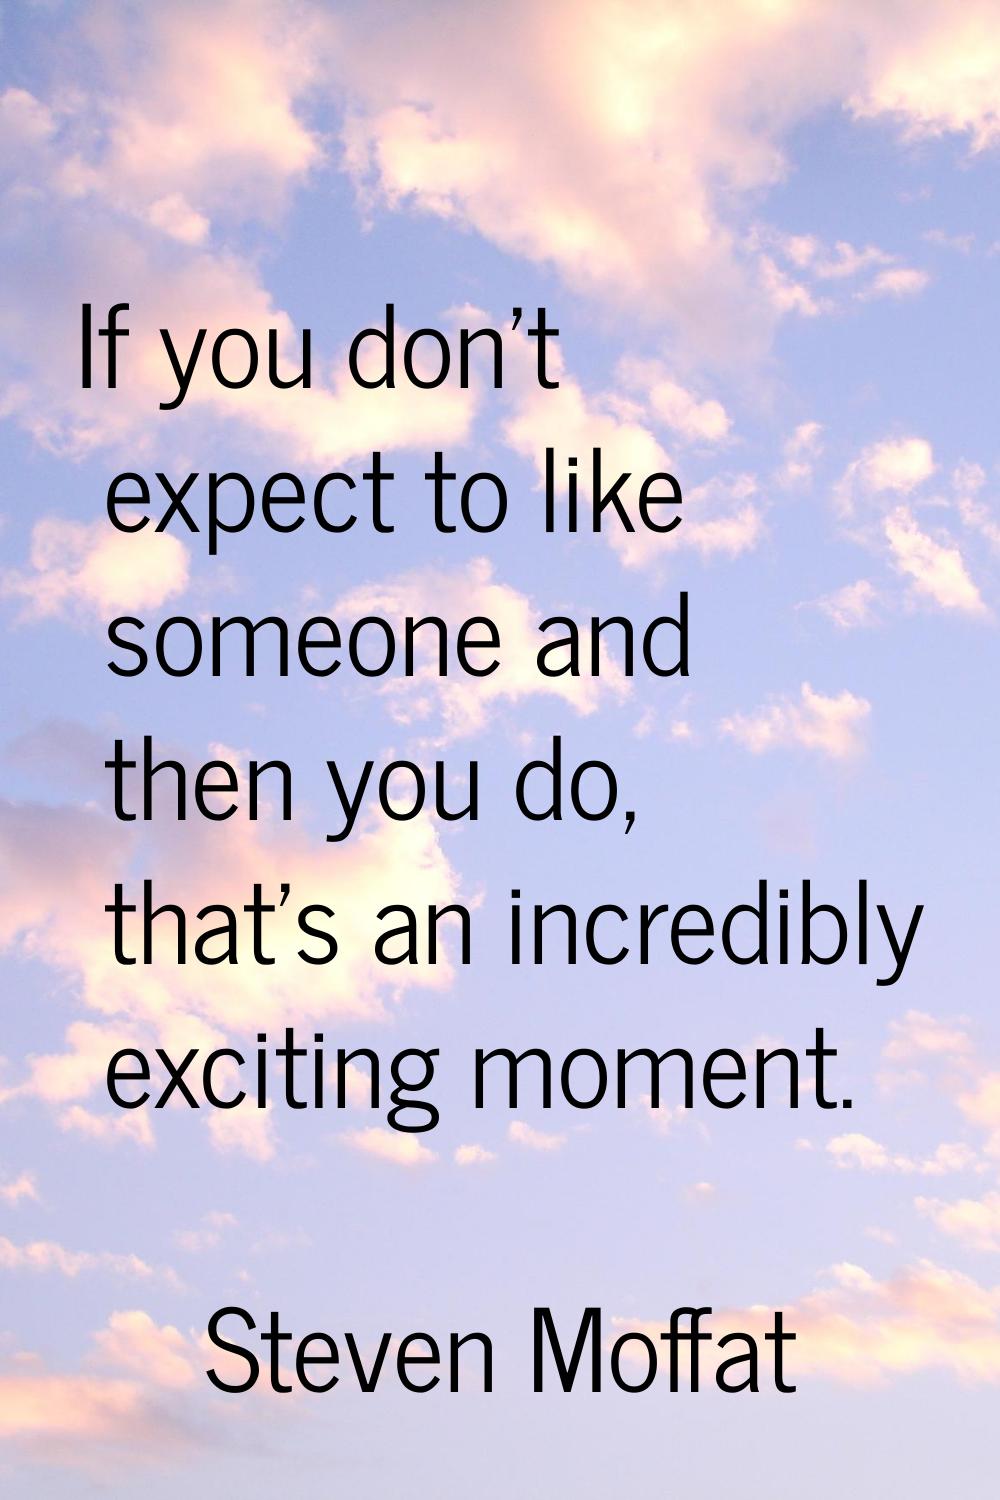 If you don't expect to like someone and then you do, that's an incredibly exciting moment.